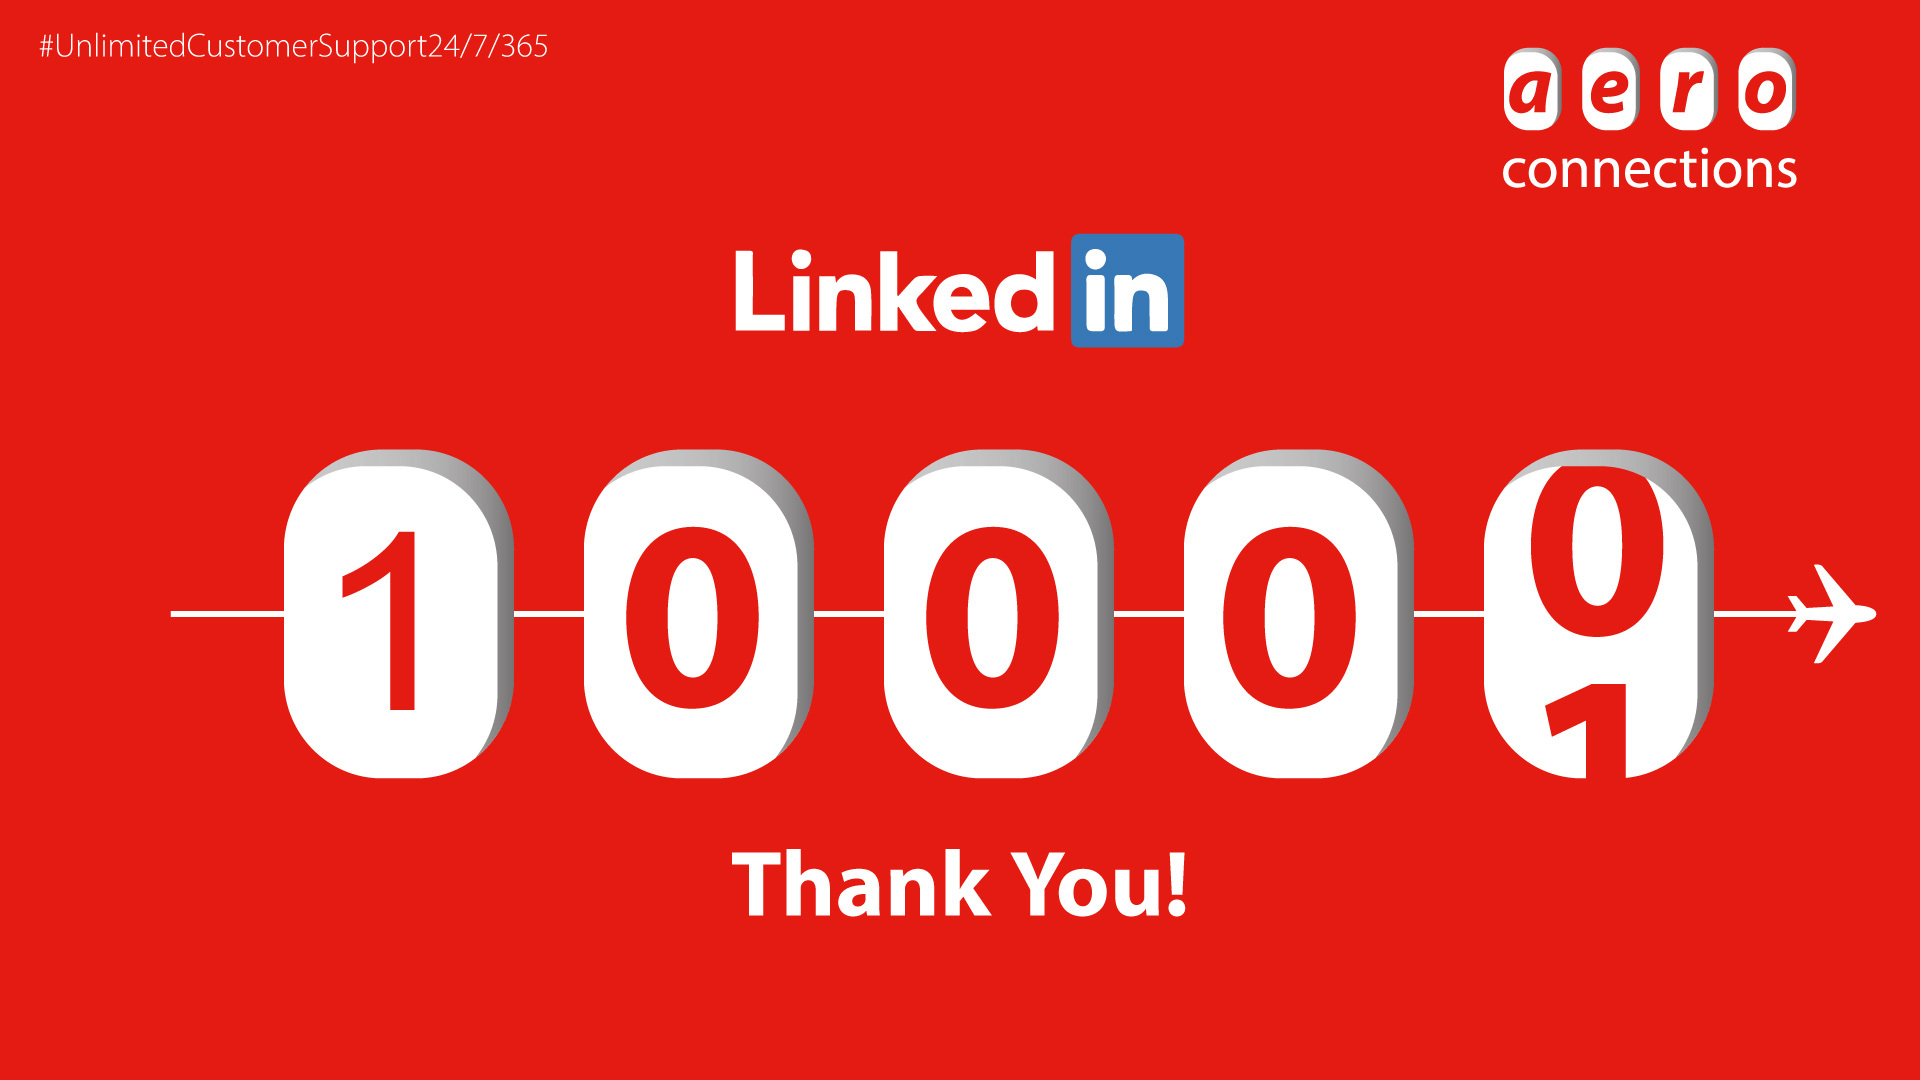 1,0000+ followers for AeroConnections LinkedIn page: A special thank you!